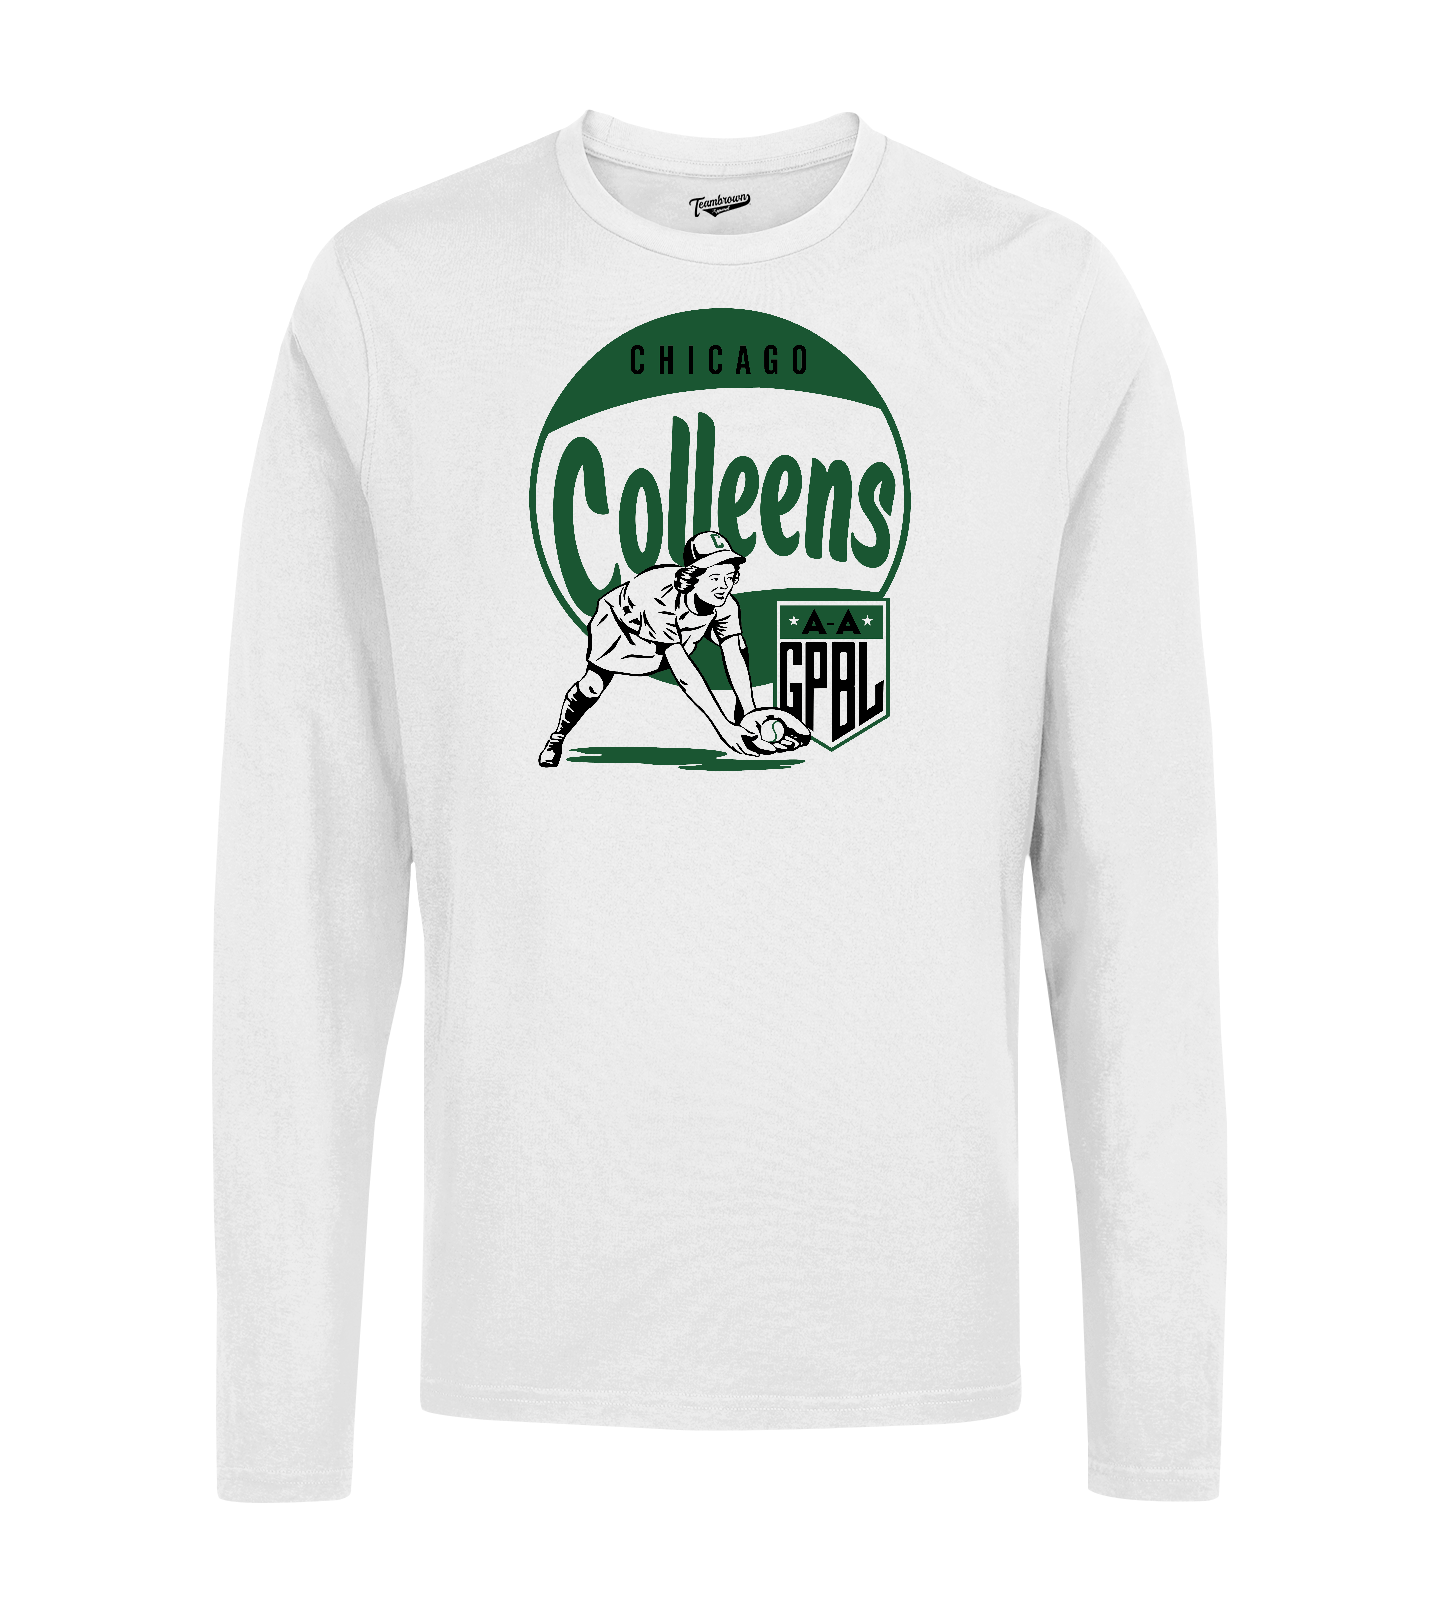 Diamond - Chicago Colleens - Unisex Long Sleeve Crew T-Shirt | Officially Licensed - AAGPBL